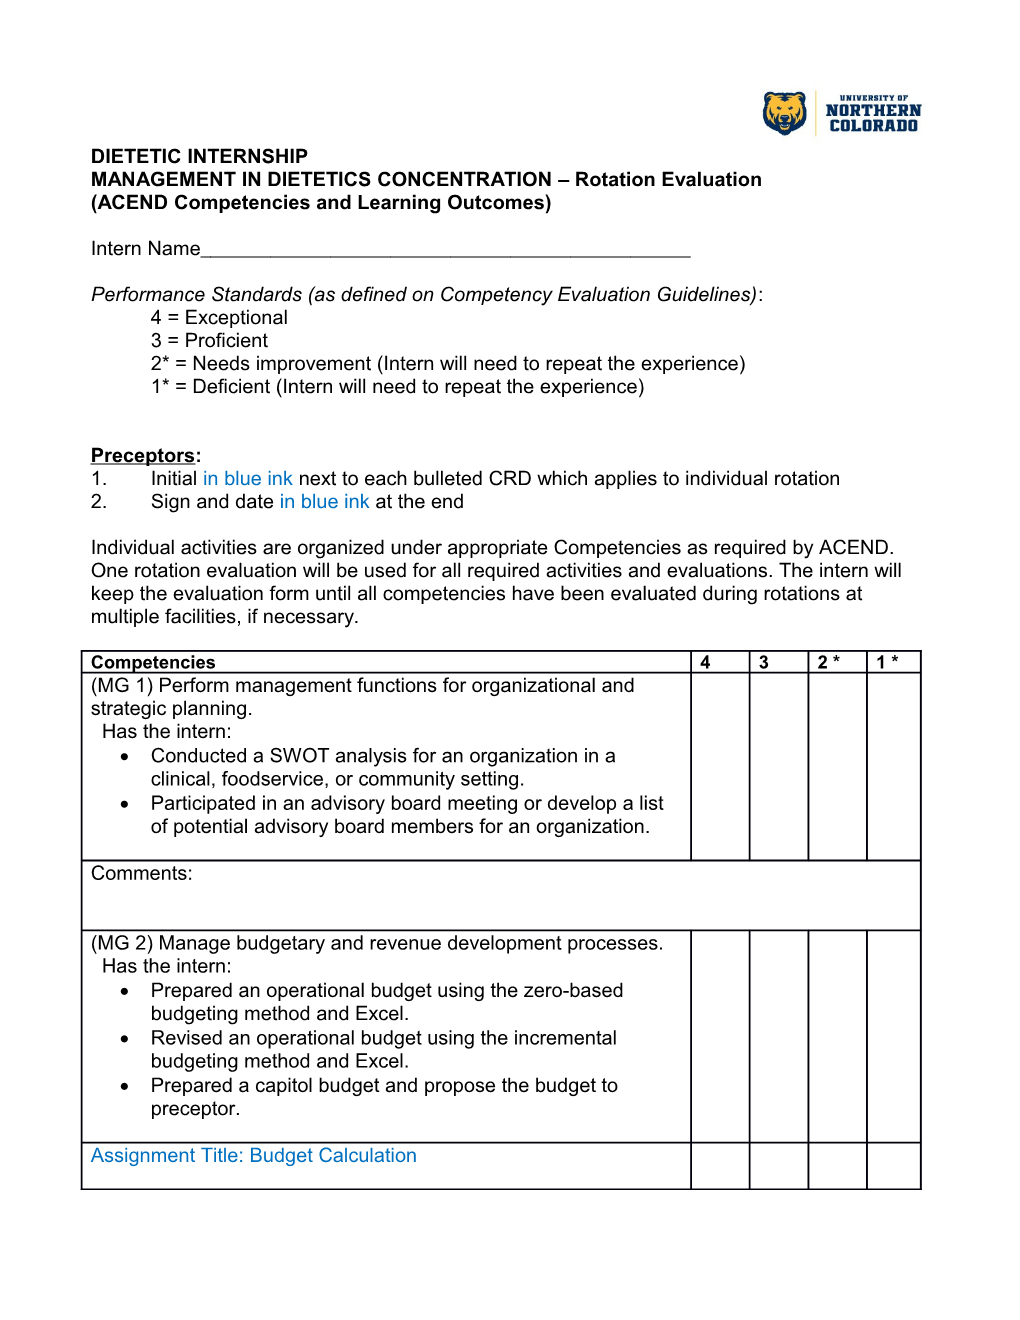 MANAGEMENT in DIETETICS CONCENTRATION Rotation Evaluation